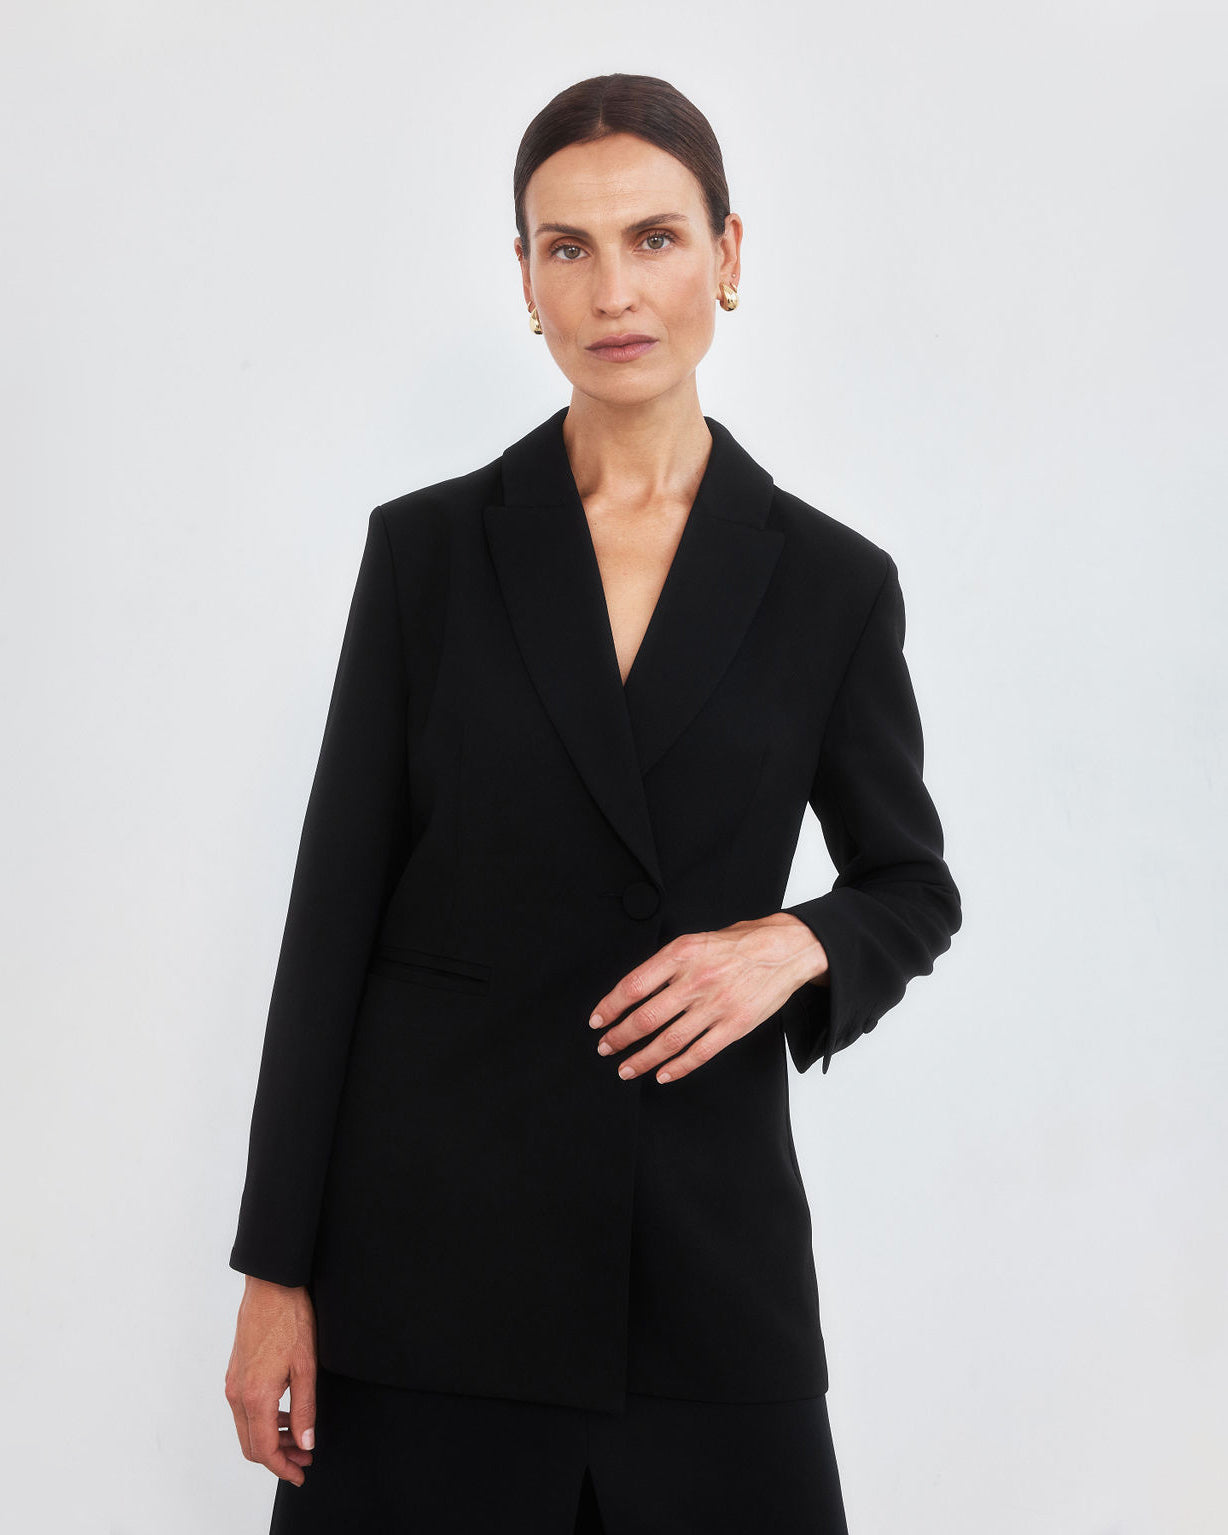 Middle aged women with brown pulled back hair holding the waist of a tailored black blazer